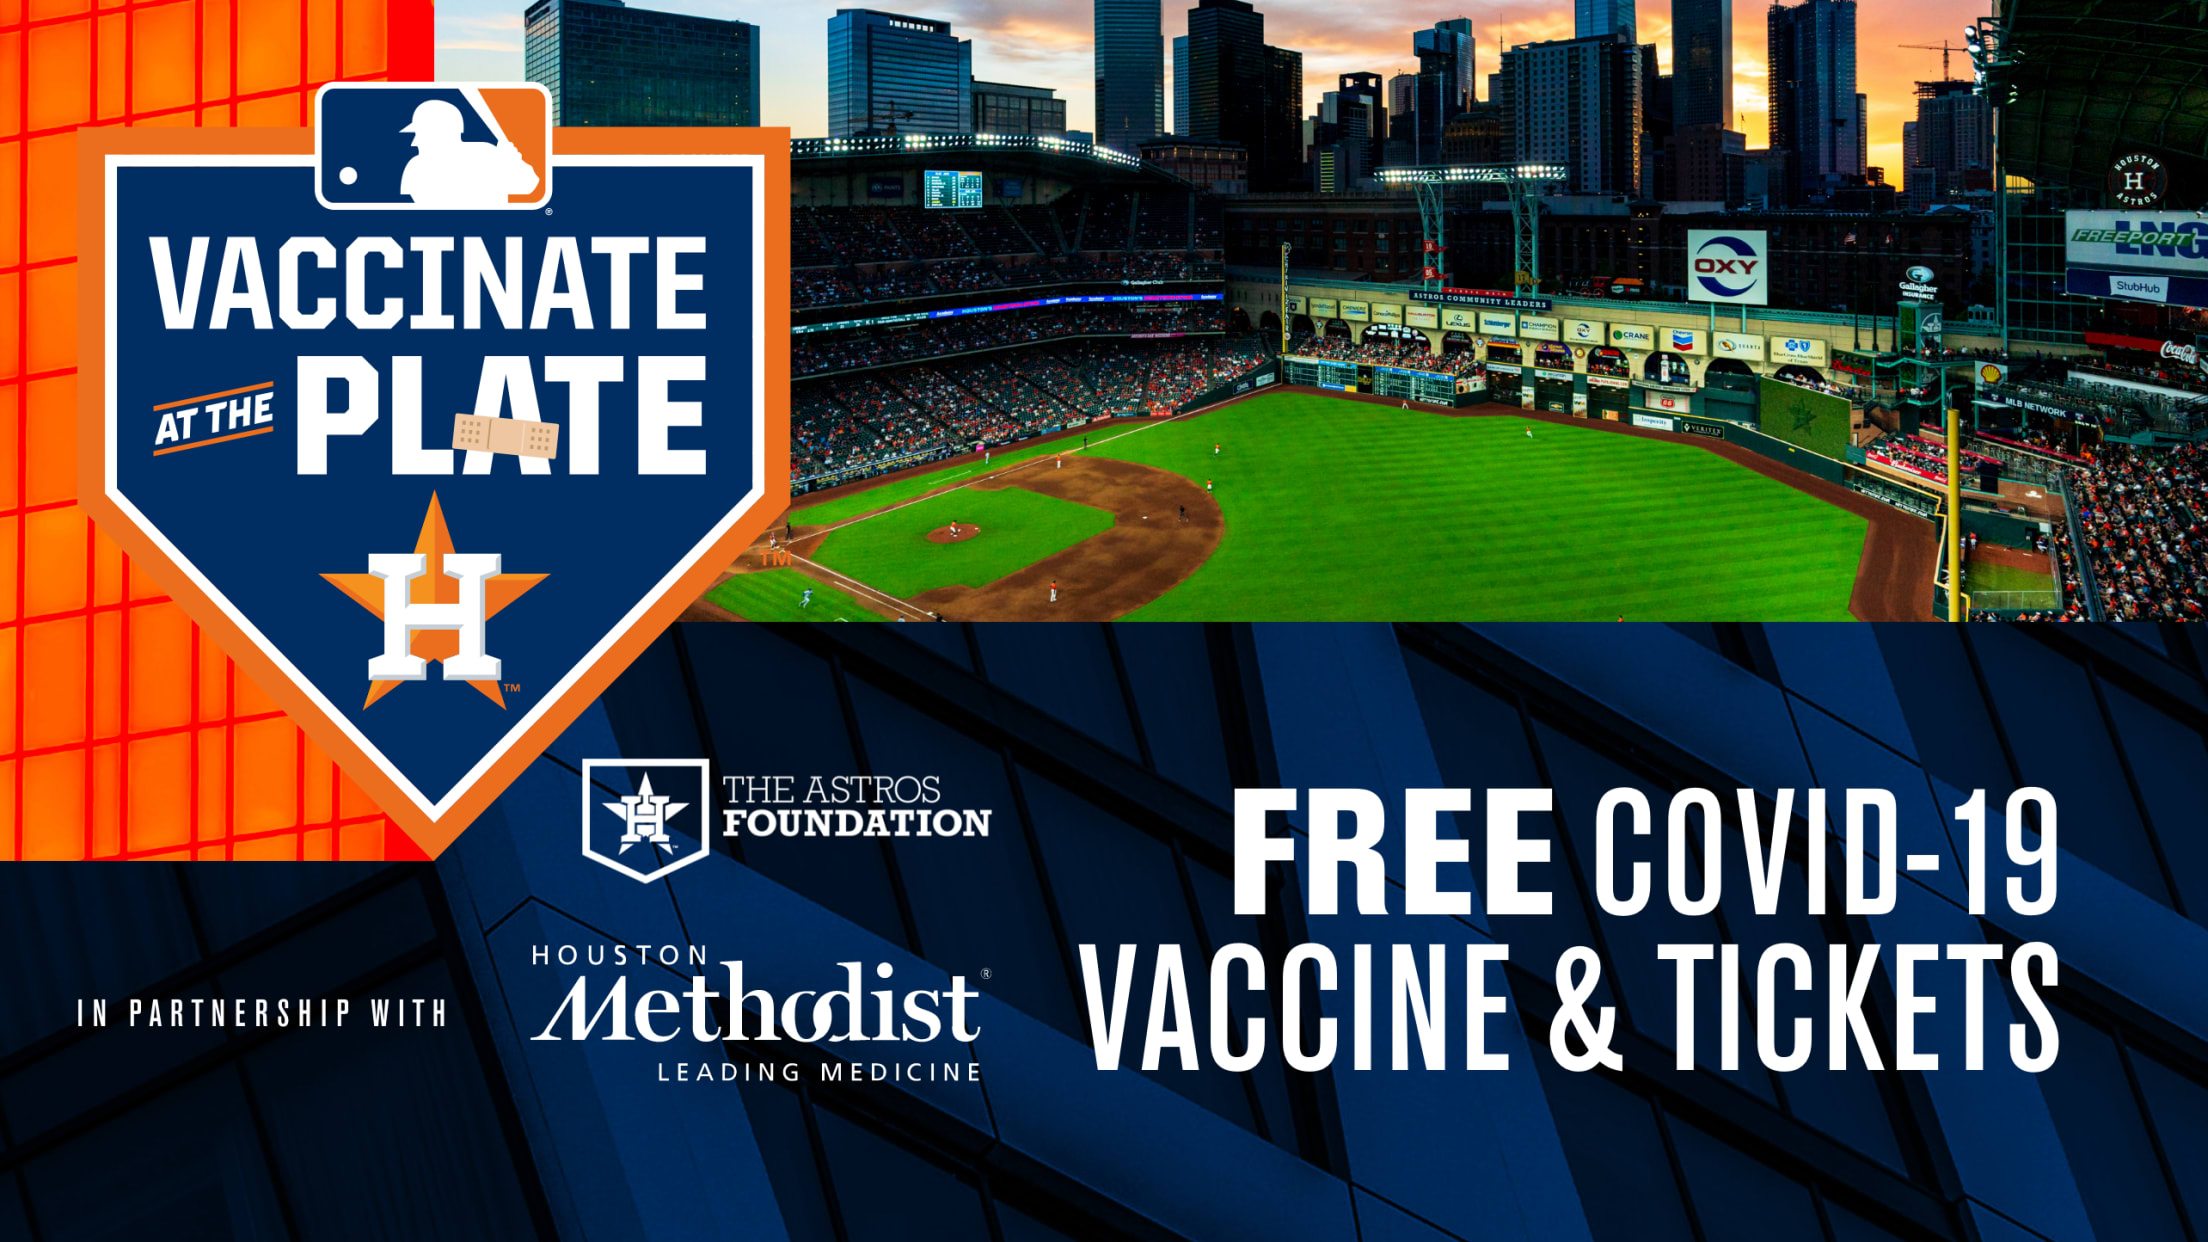 MLB not requiring COVID-19 vaccines for minor leaguers